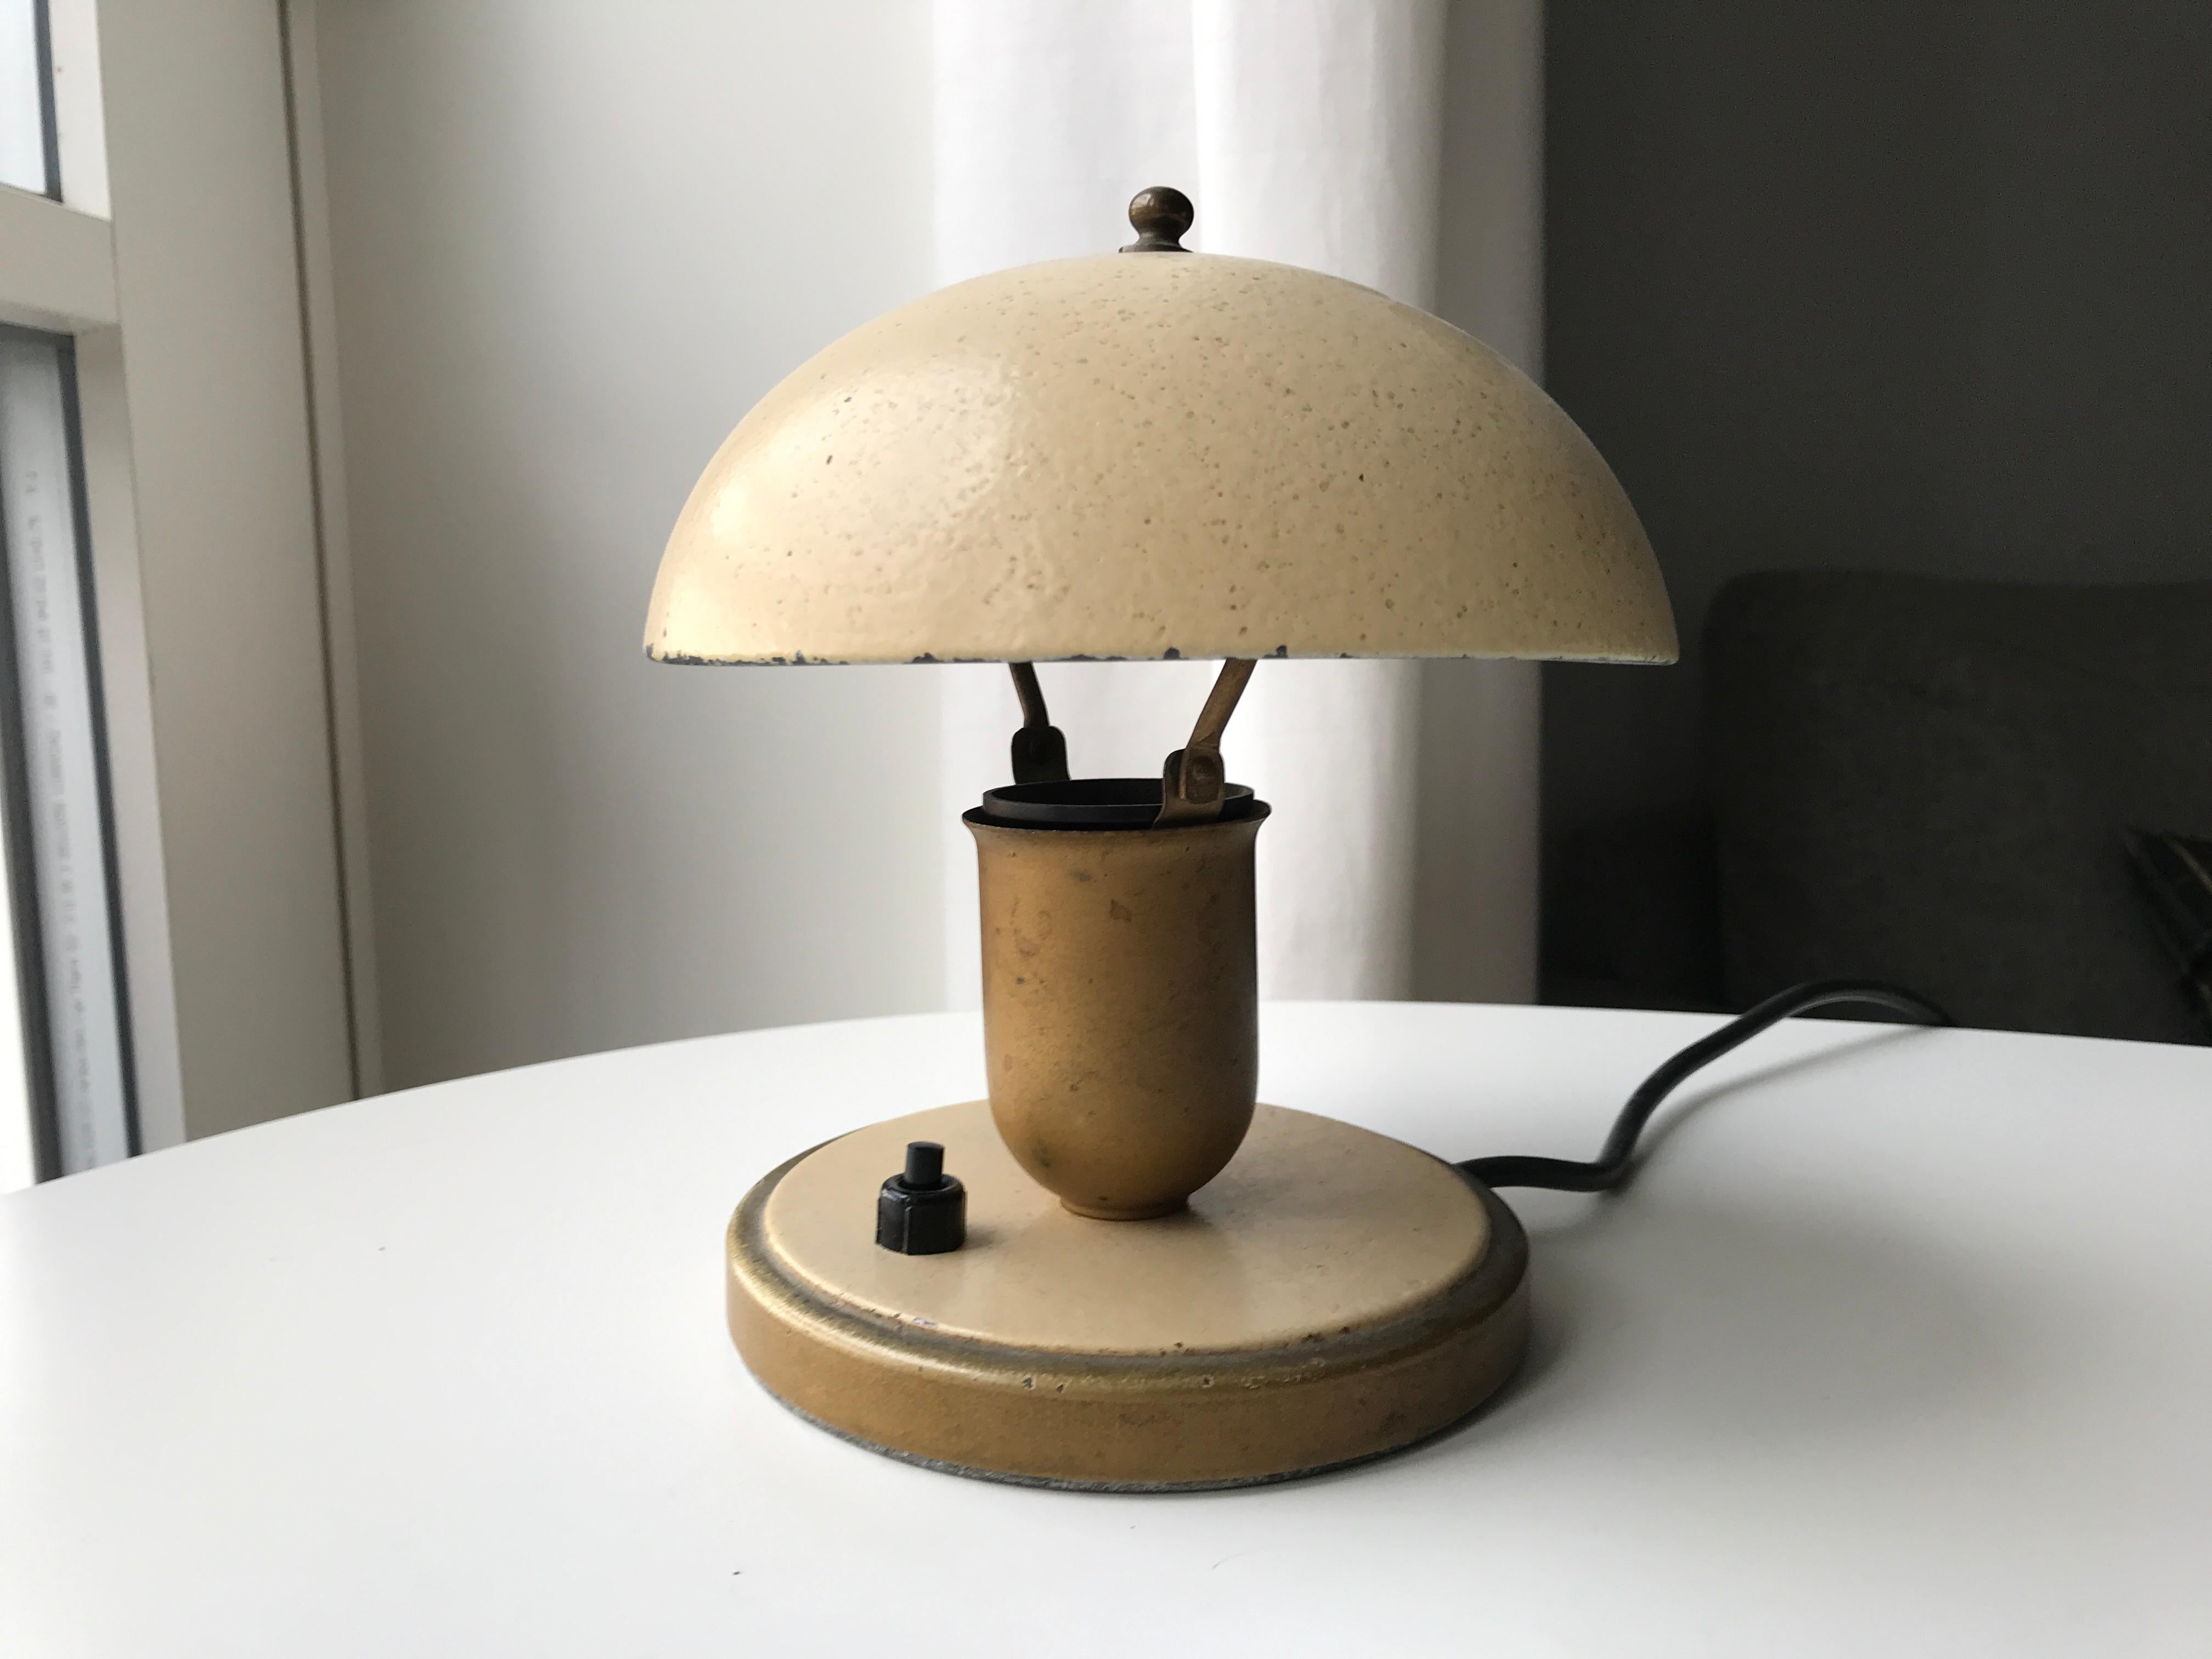 20th Century Art Deco Bedside Table Lamps